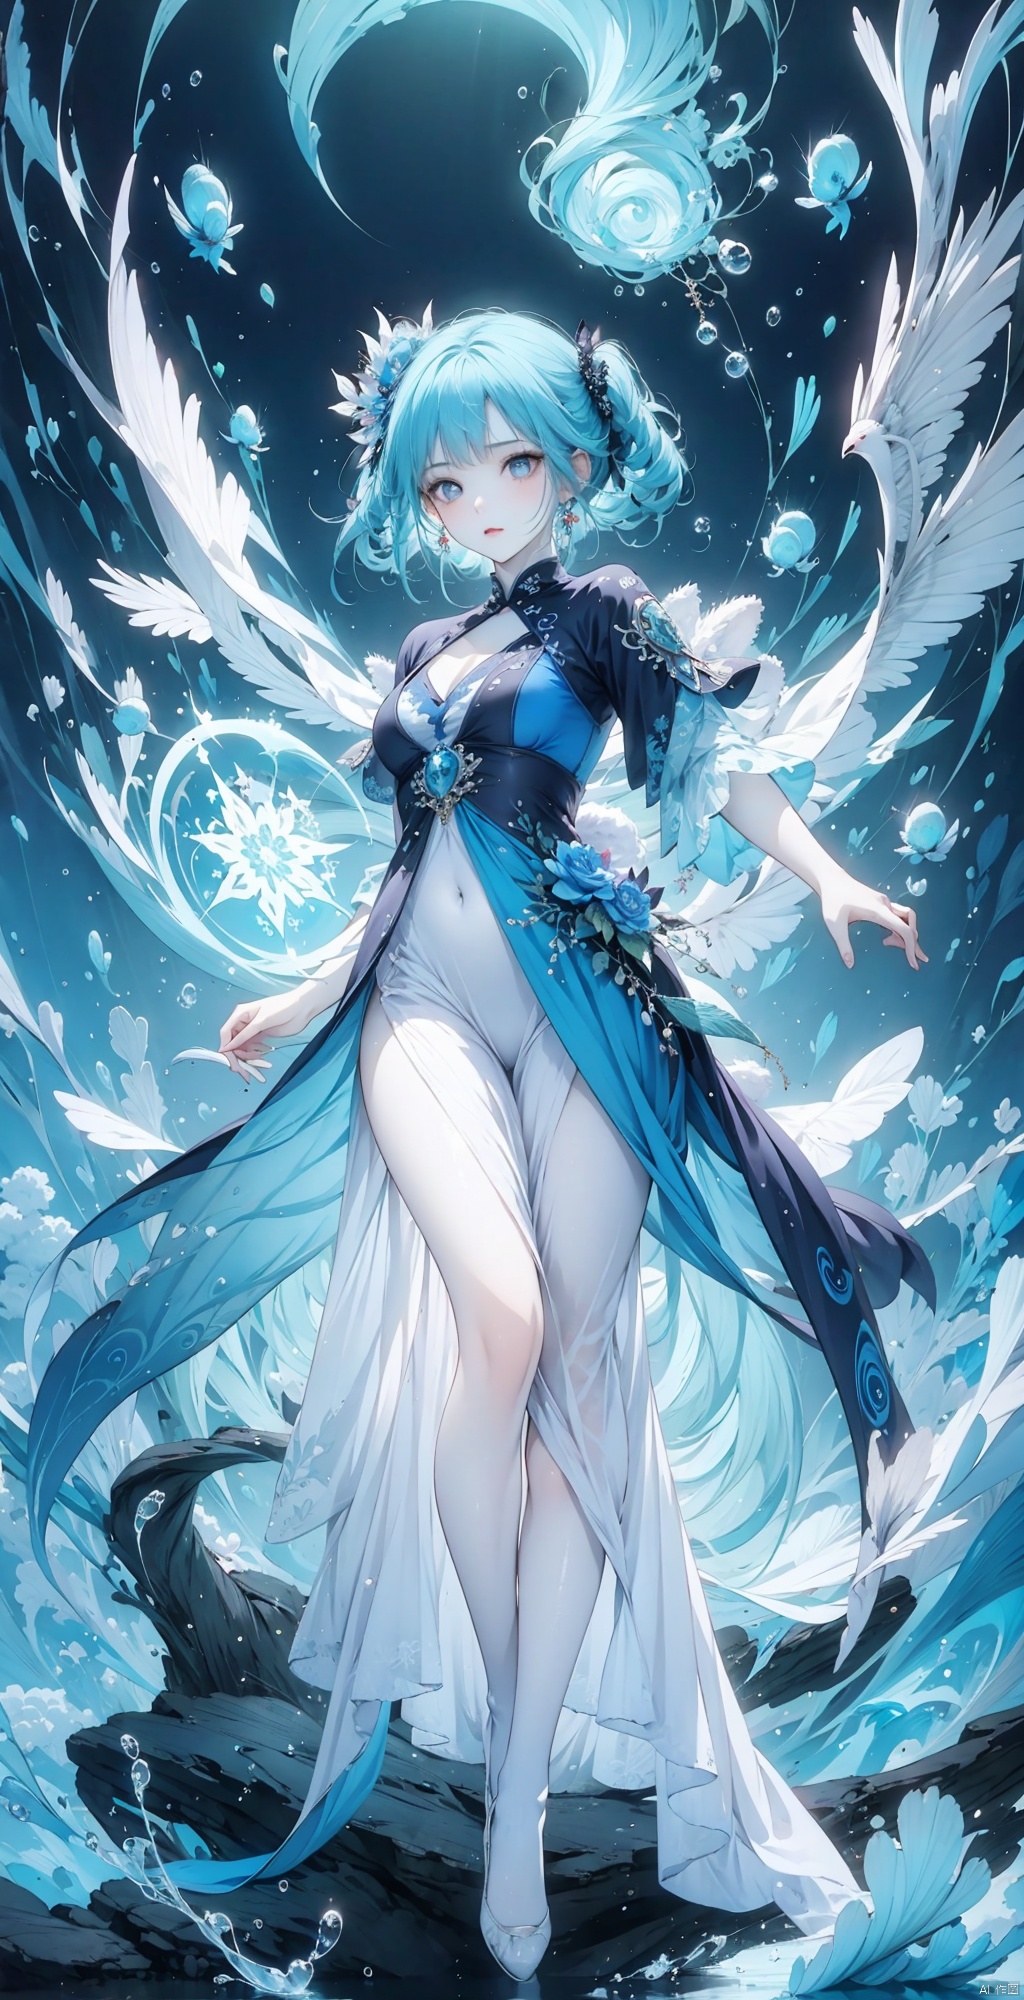  By ross tran, artgerm, 1girl, full body,Persian girl, exquisite facial features, Long legs, long legs, royal elder sister, Gao Lengfan,dark blue eyes, Lolita, chibi, fluorescent, blue light, purple light, front, 16k, high quality, blue lightning, glowing hair, floating hair, underwater creatures, glowing jellyfish, bubbles, peacock feathers, fantasy illustrations, camera watching, complex background, line art.